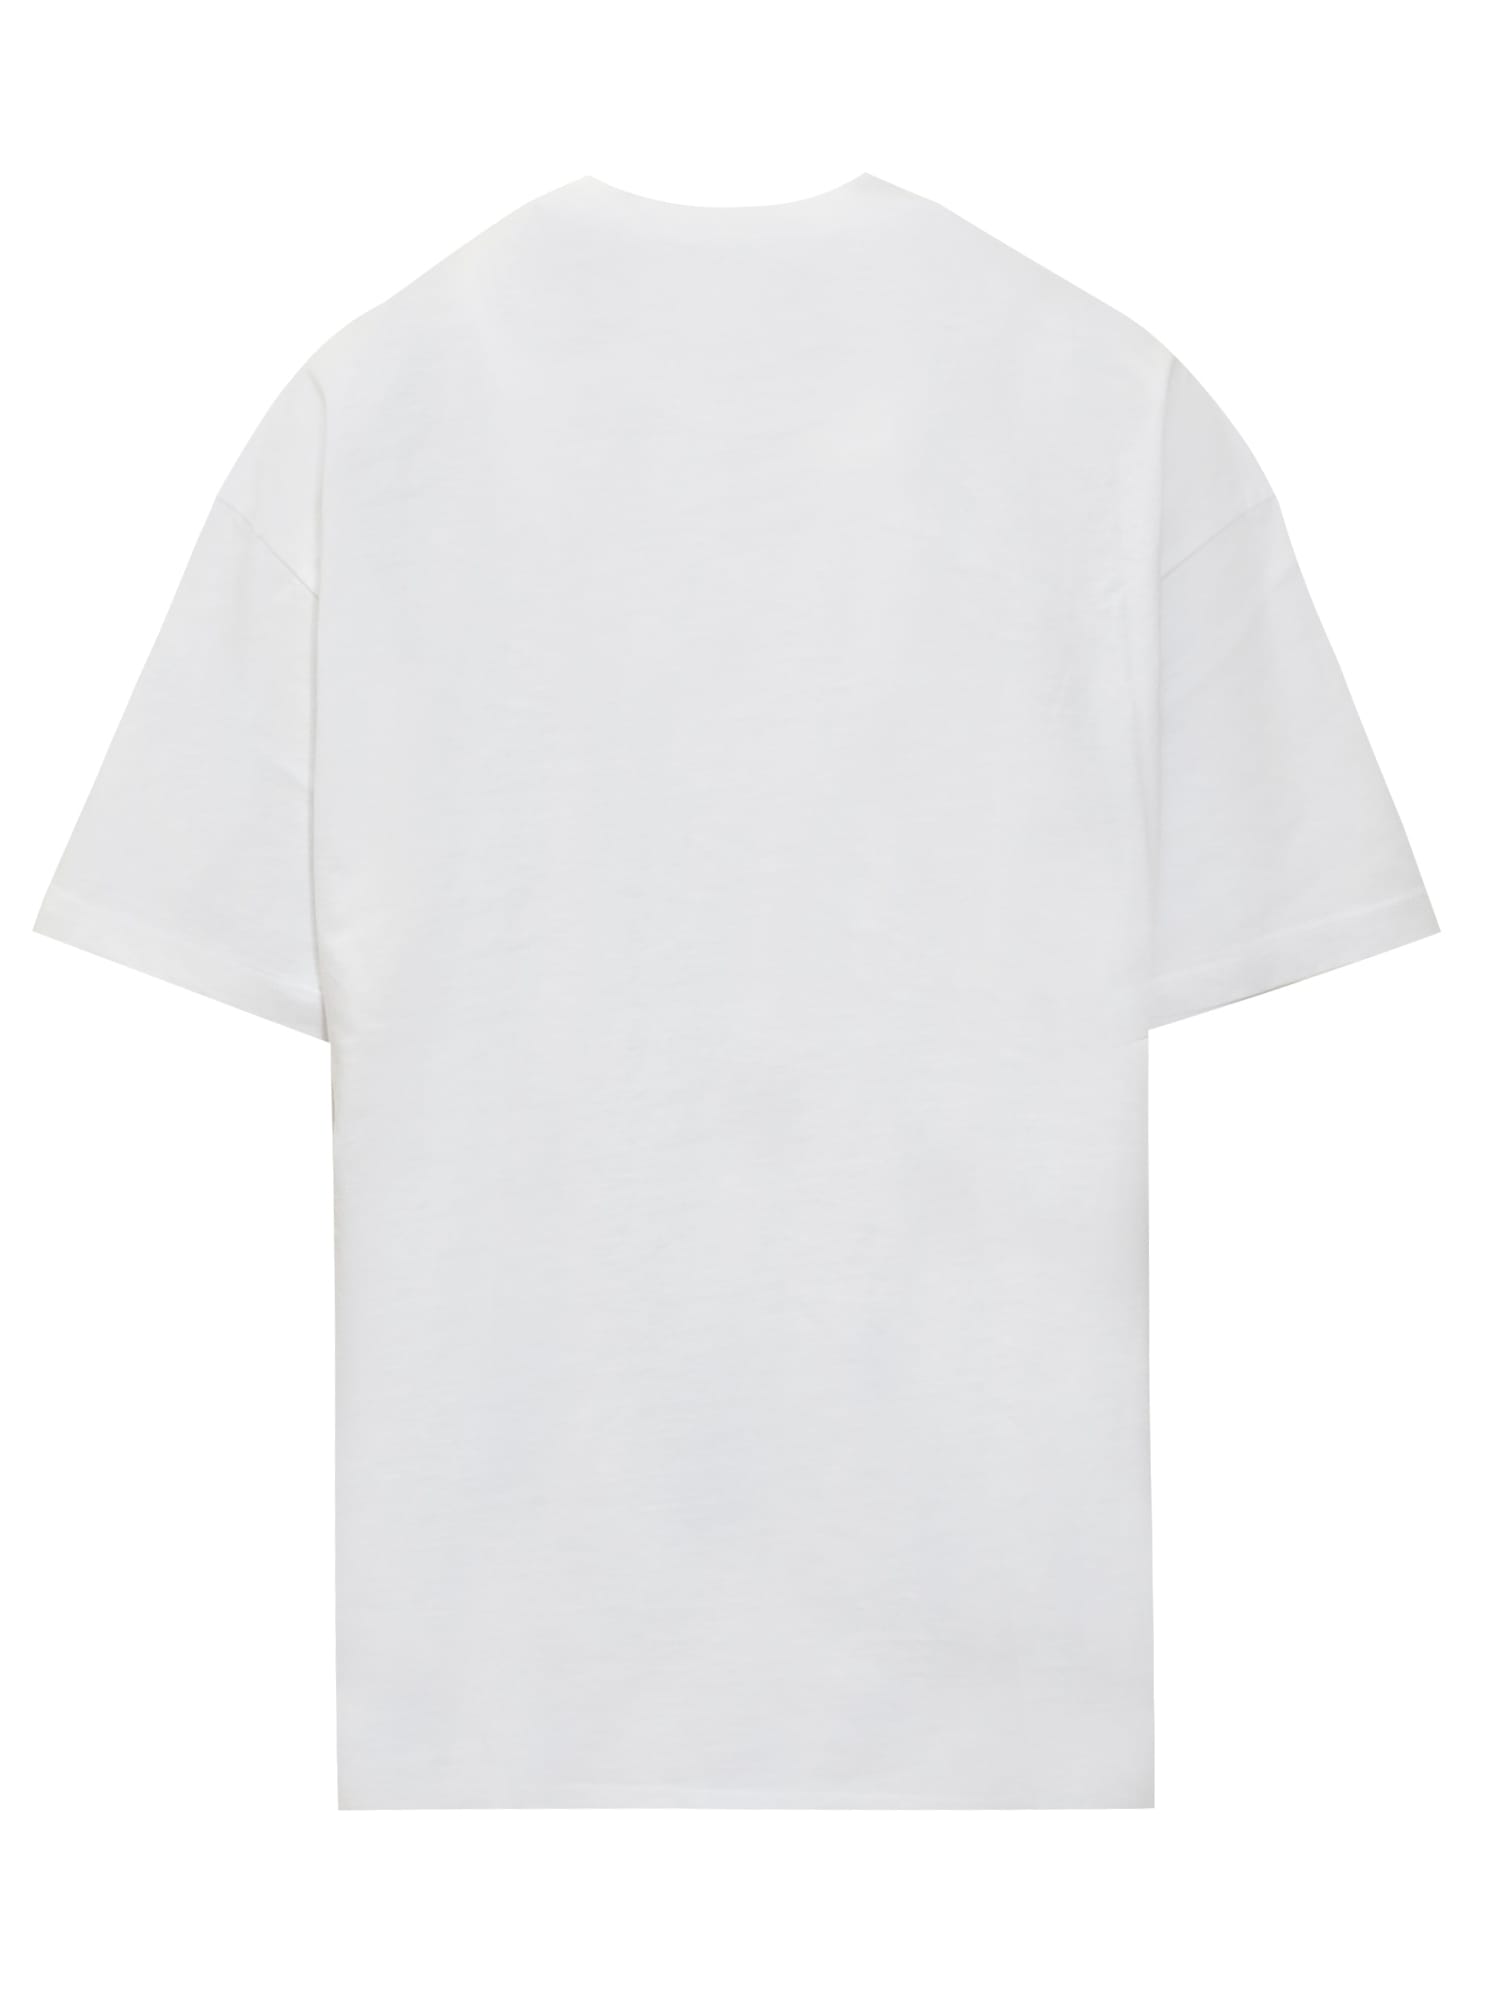 Shop Off-white Oversize Off T-shirt In White Black